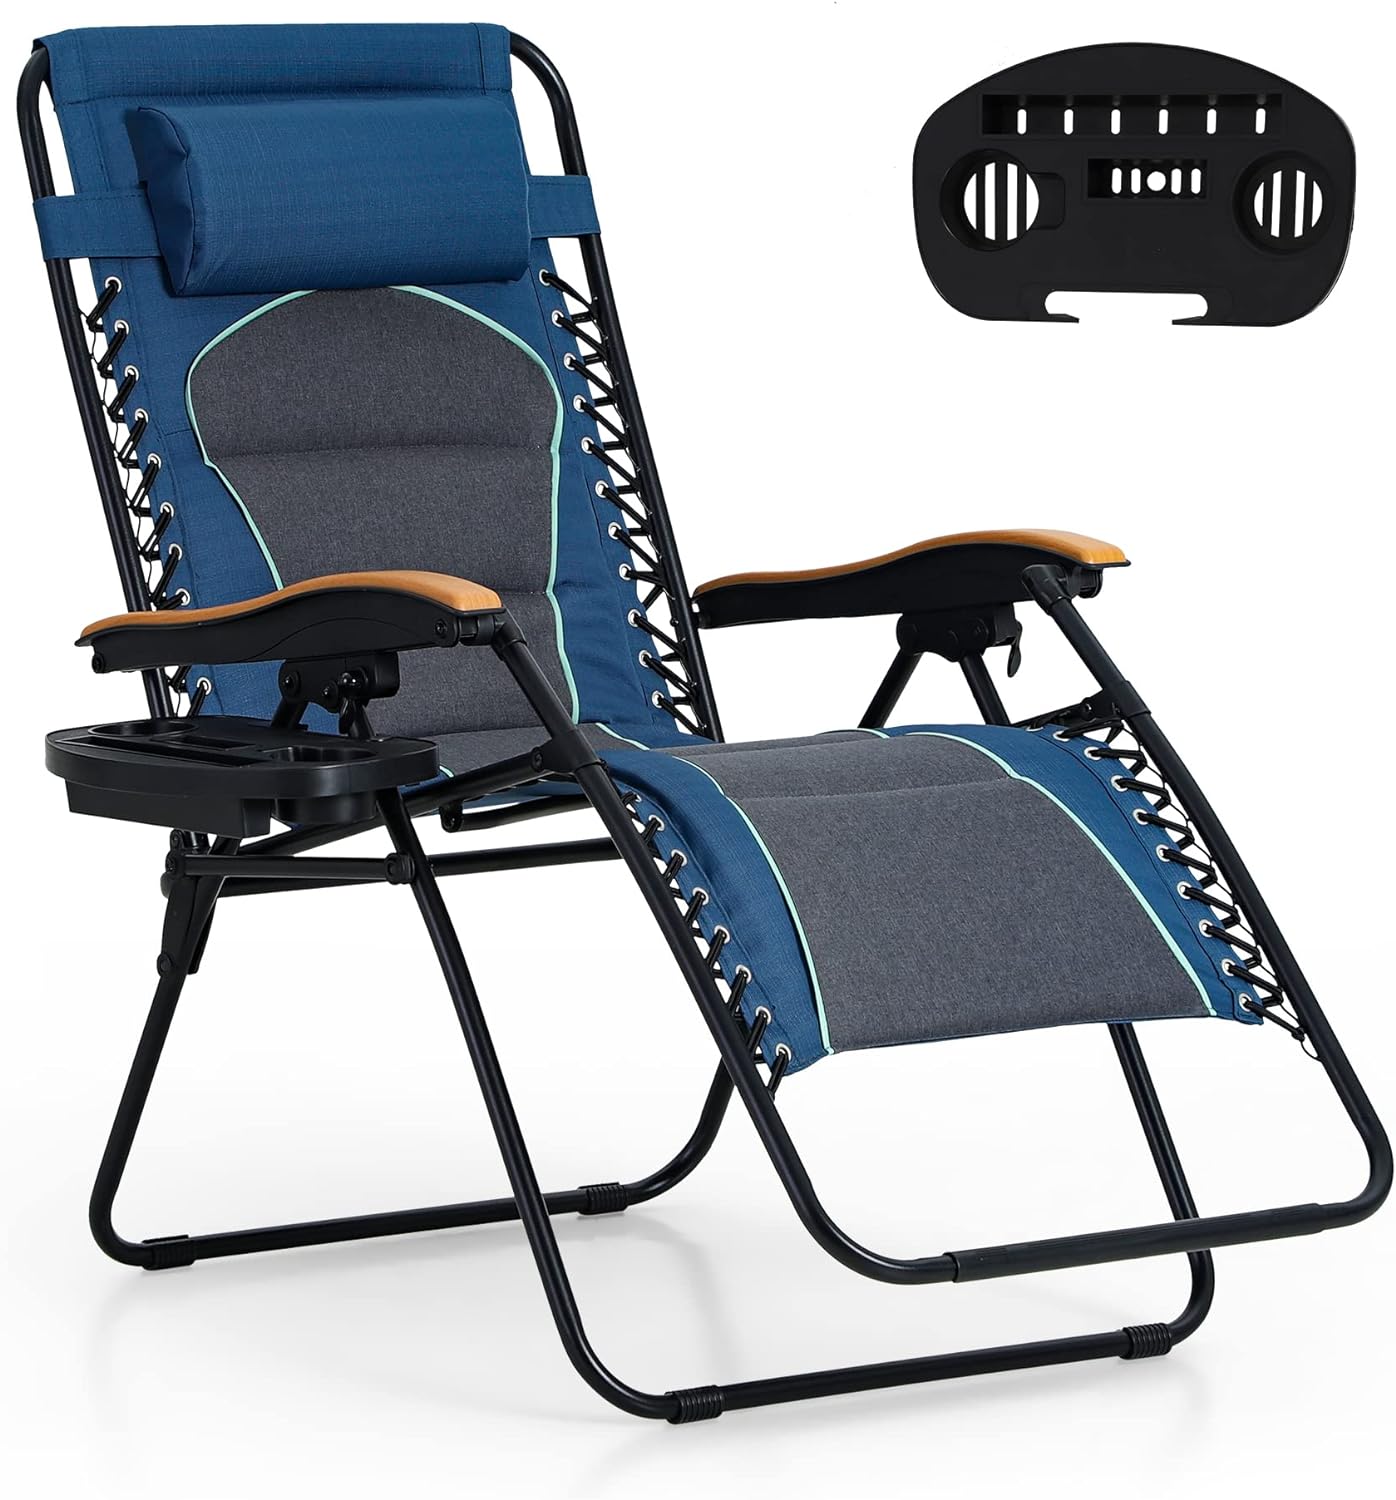 MFSTUDIO Zero Gravity Chairs, Oversized Patio Recliner Chair, Padded Folding Lawn Chair with Cup Holder Tray, Support 400lbs, Blue